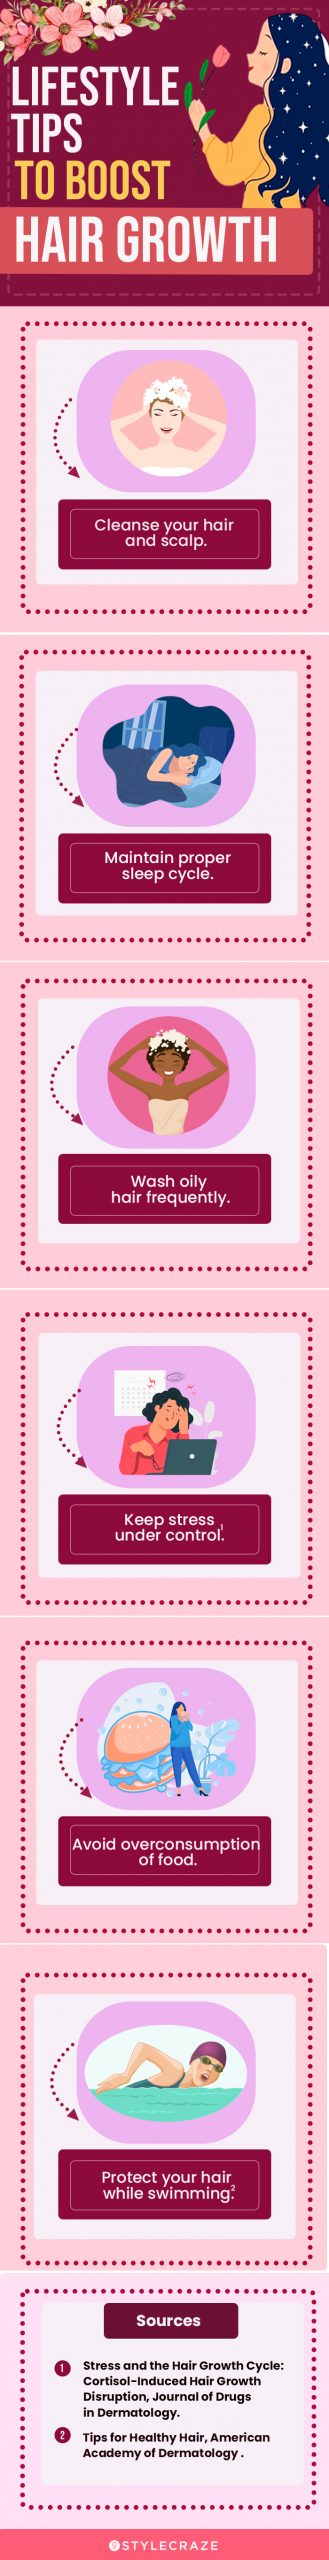 life style tips to boost hair growth [infographic]